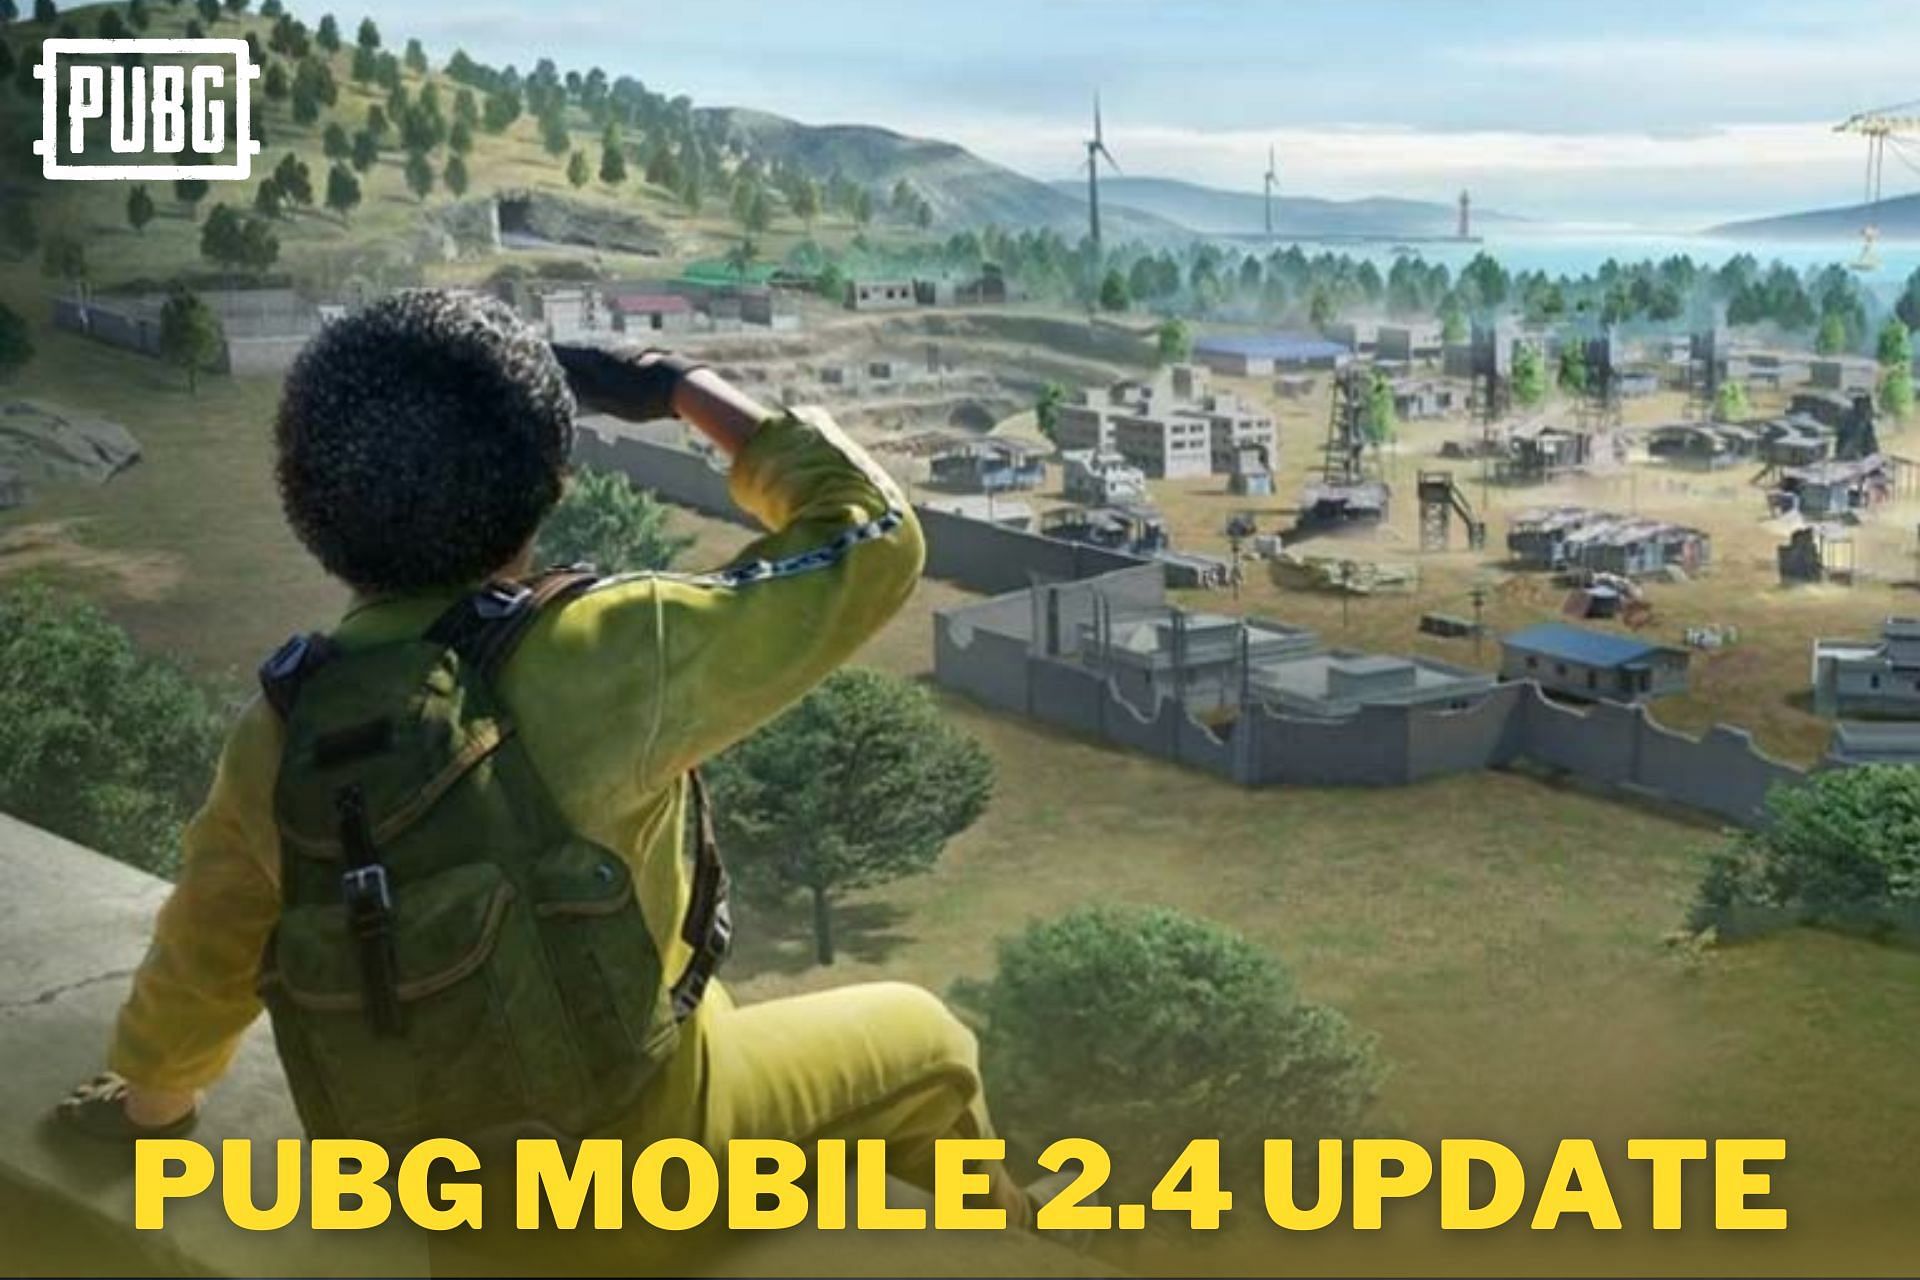 PUBG Mobile 2.4 update features, rewards, release date, and more